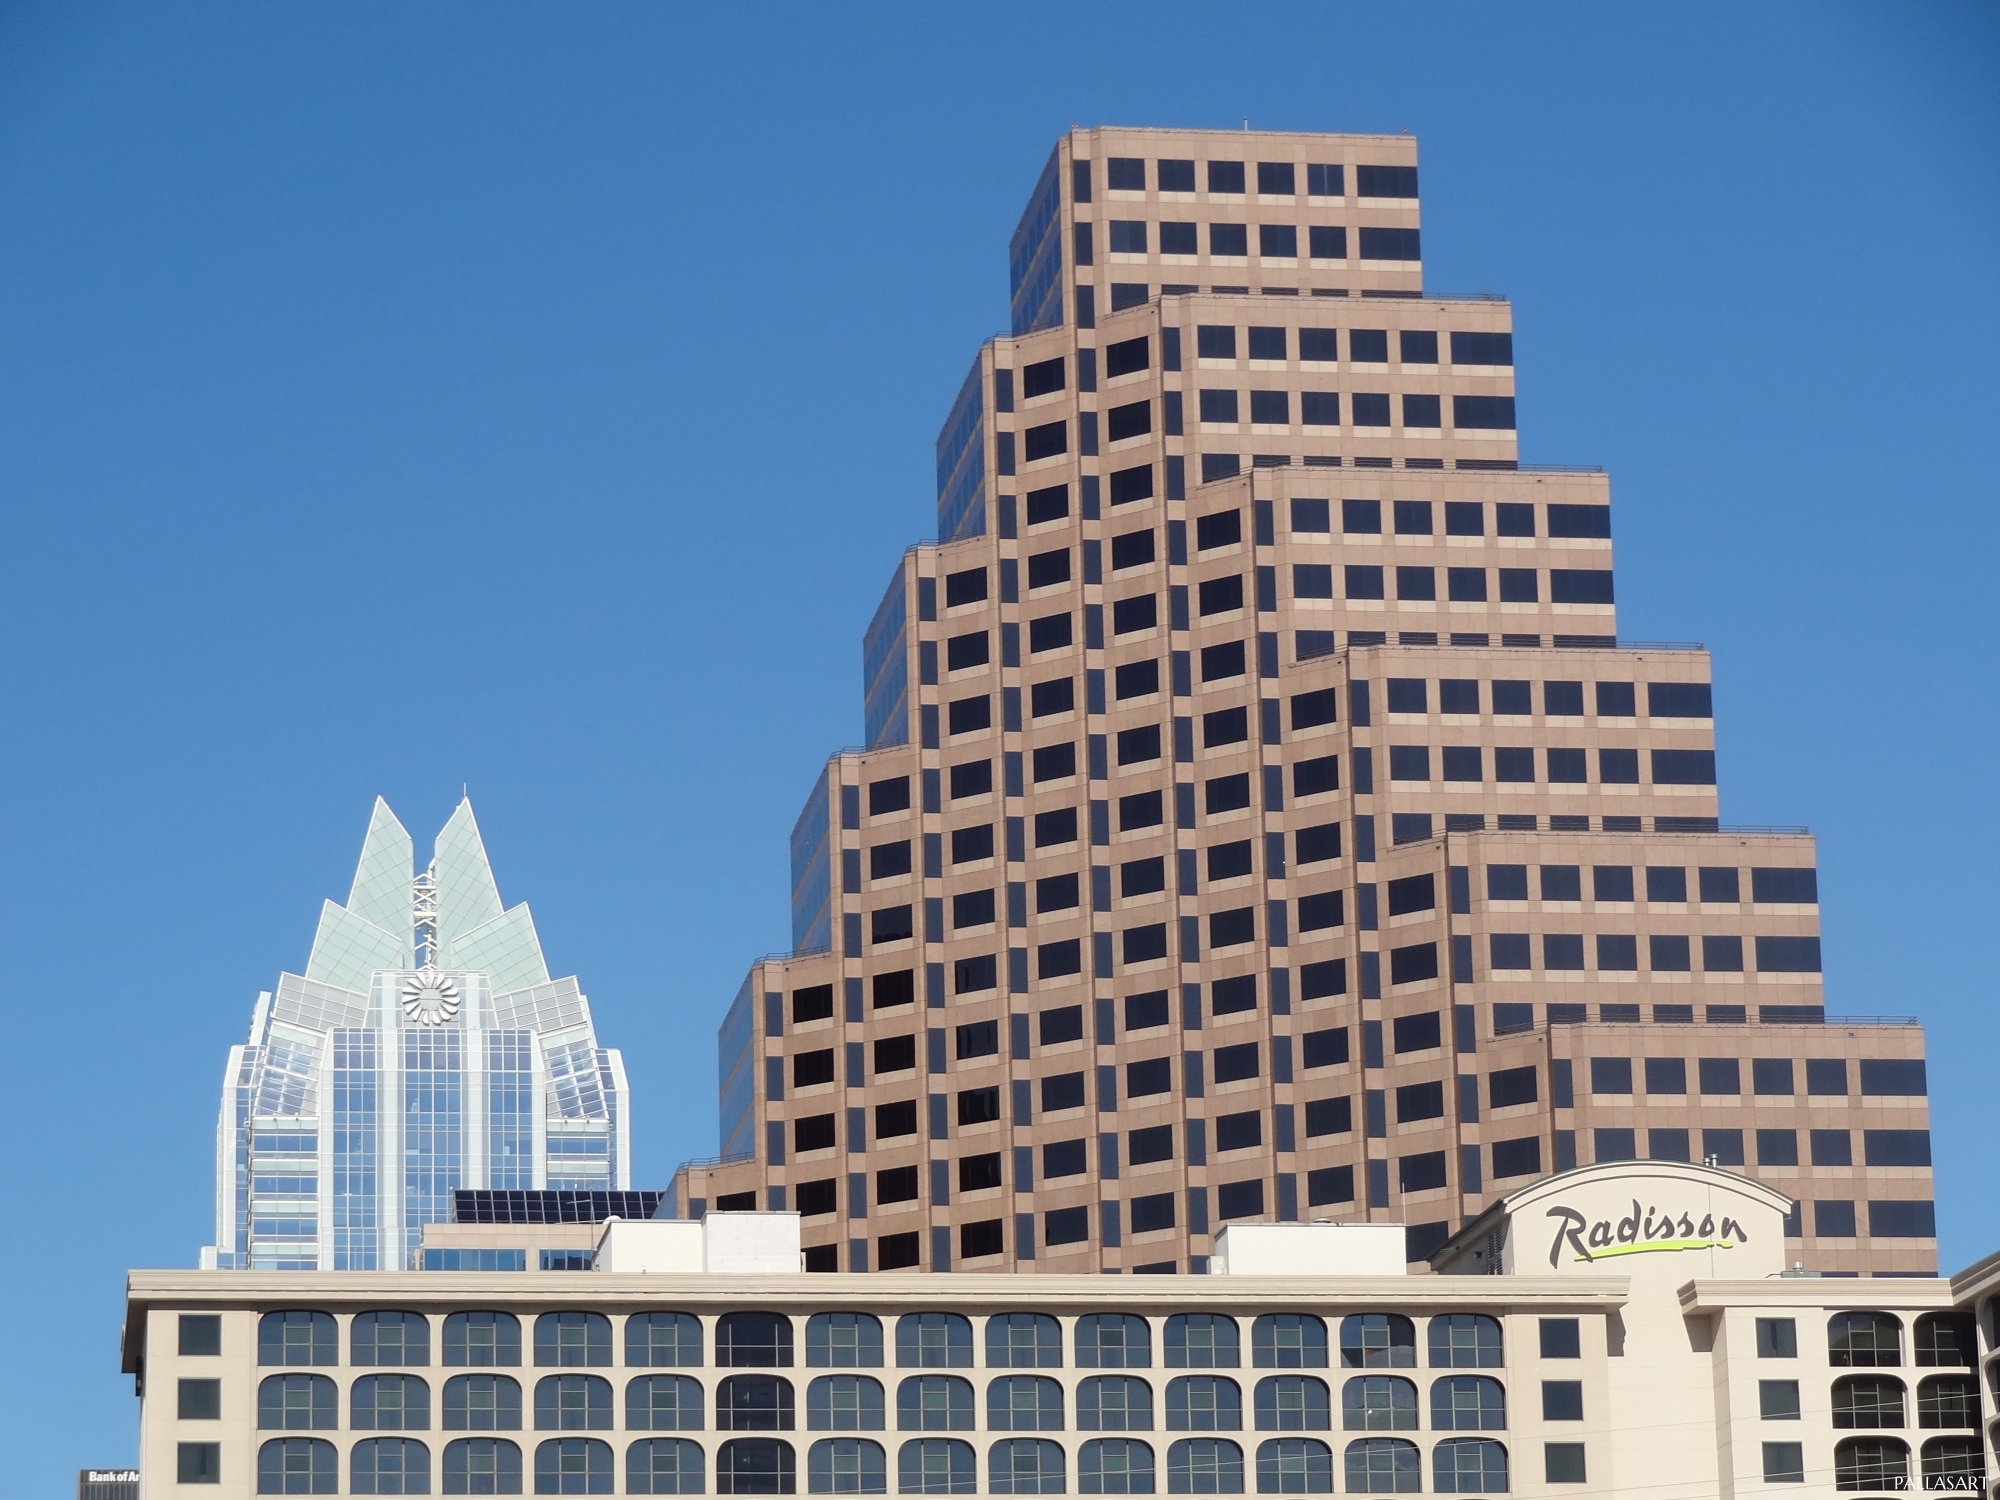 Austin Radisson Hotel with 111 Congress and Frost Bank Buildings Closer